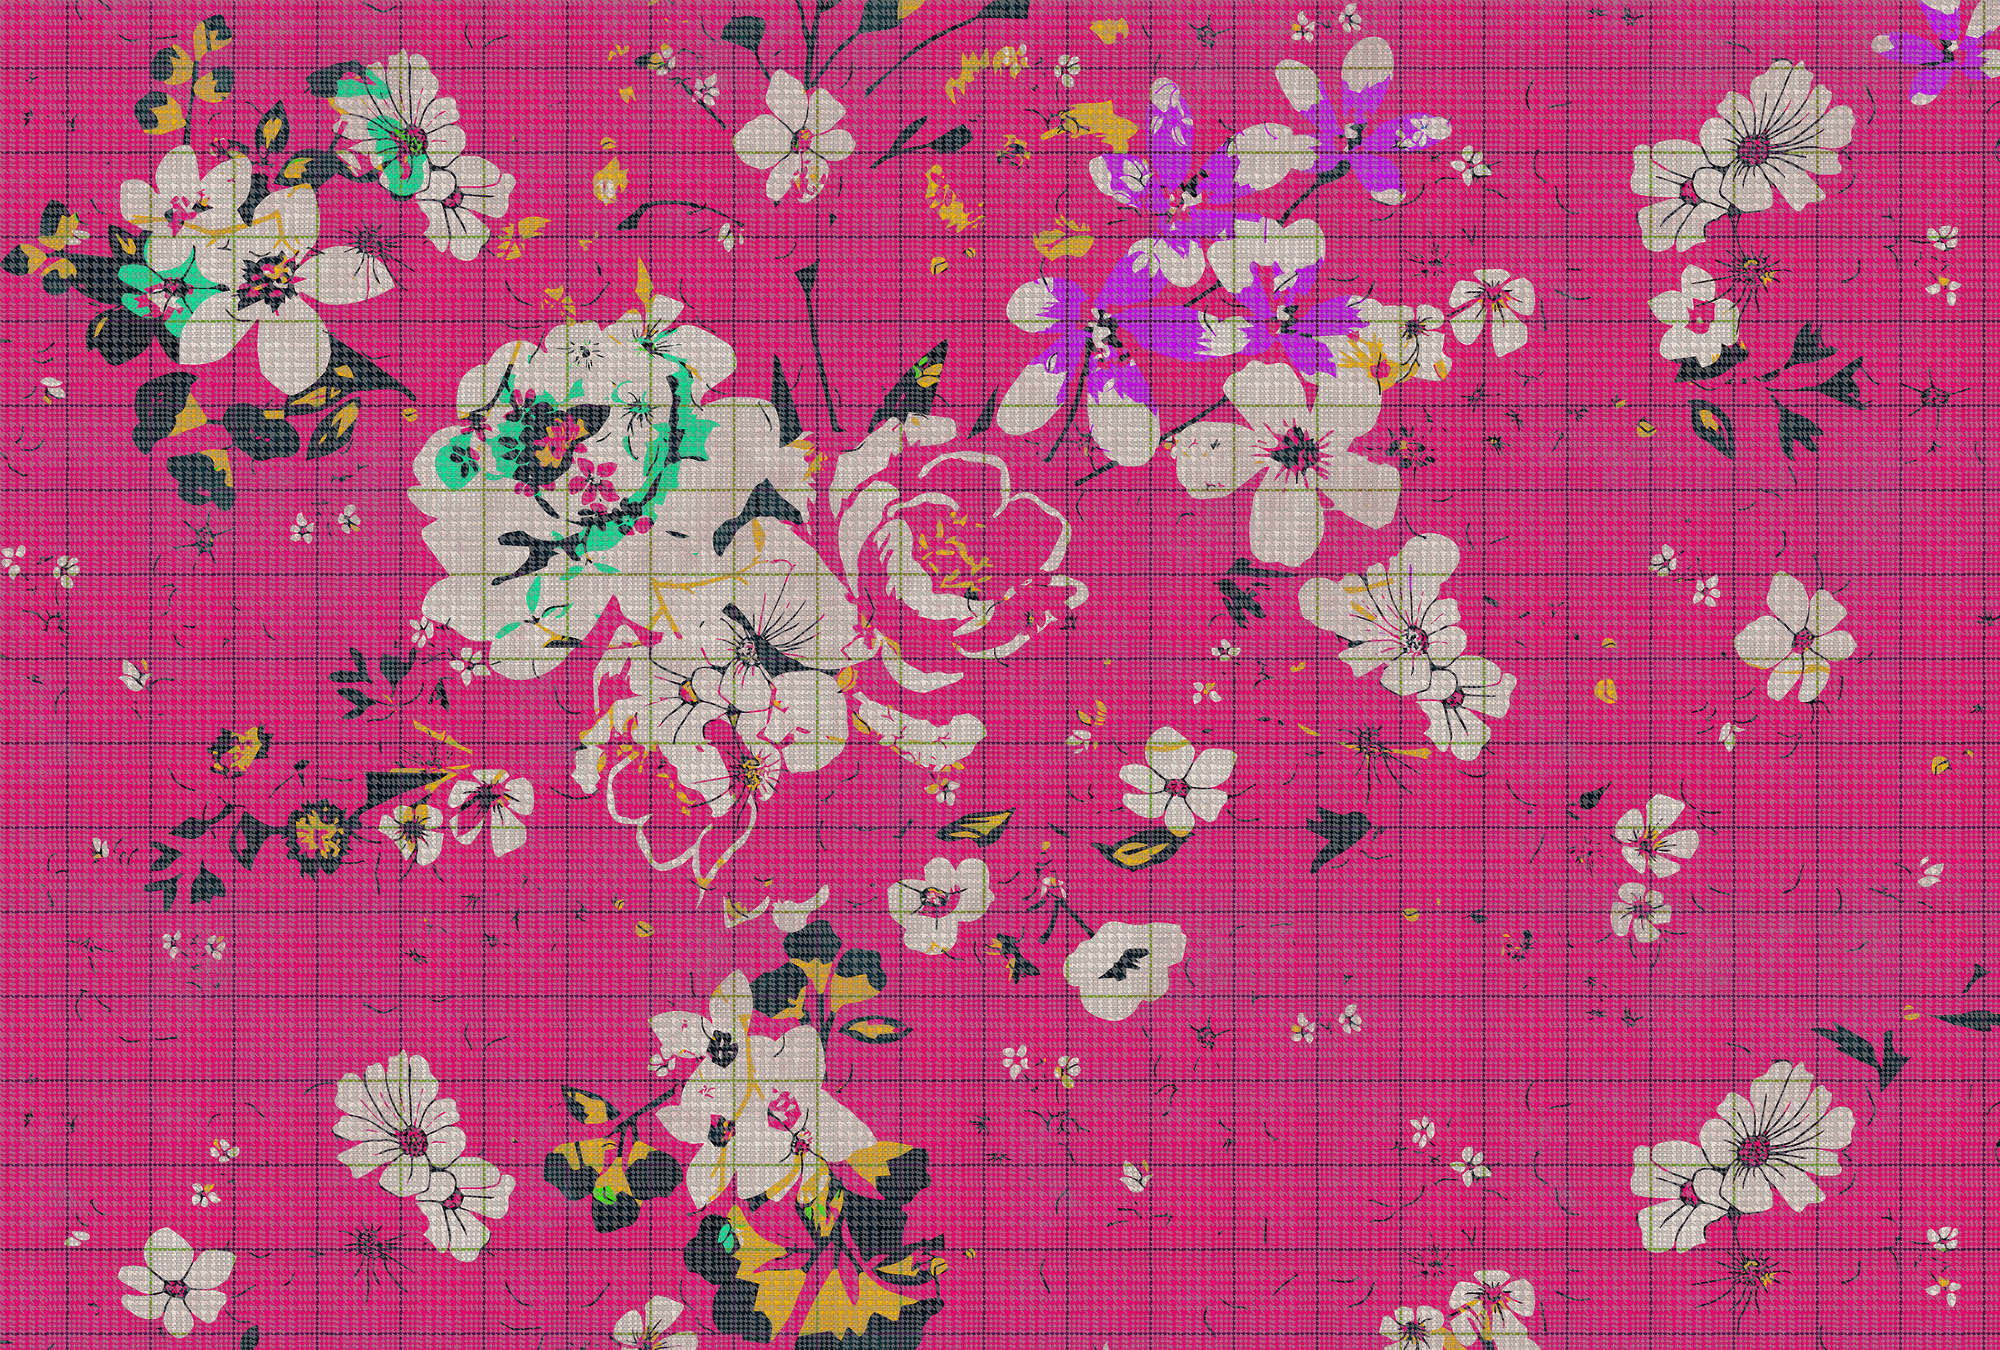             Flower plaid 2 - Photo wallpaper in checkered optics colourful flower mosaic Pink - Green, Pink | mother-of-pearl smooth fleece
        